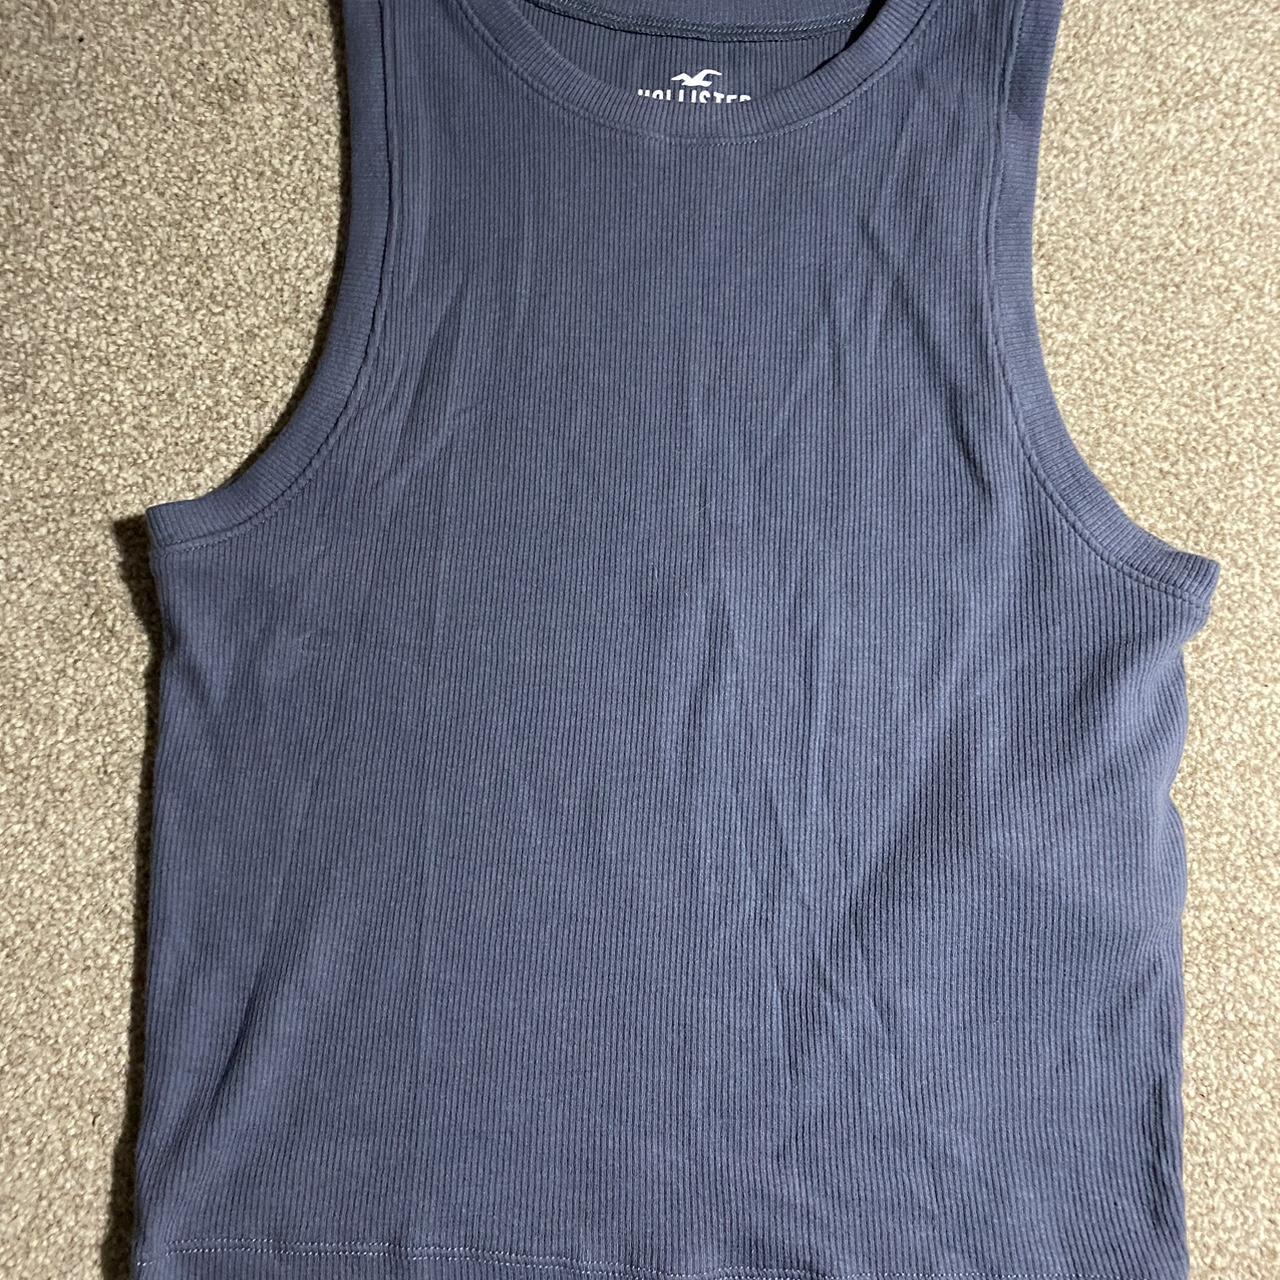 Hollister ribbed high neck tank in blue. Really... - Depop